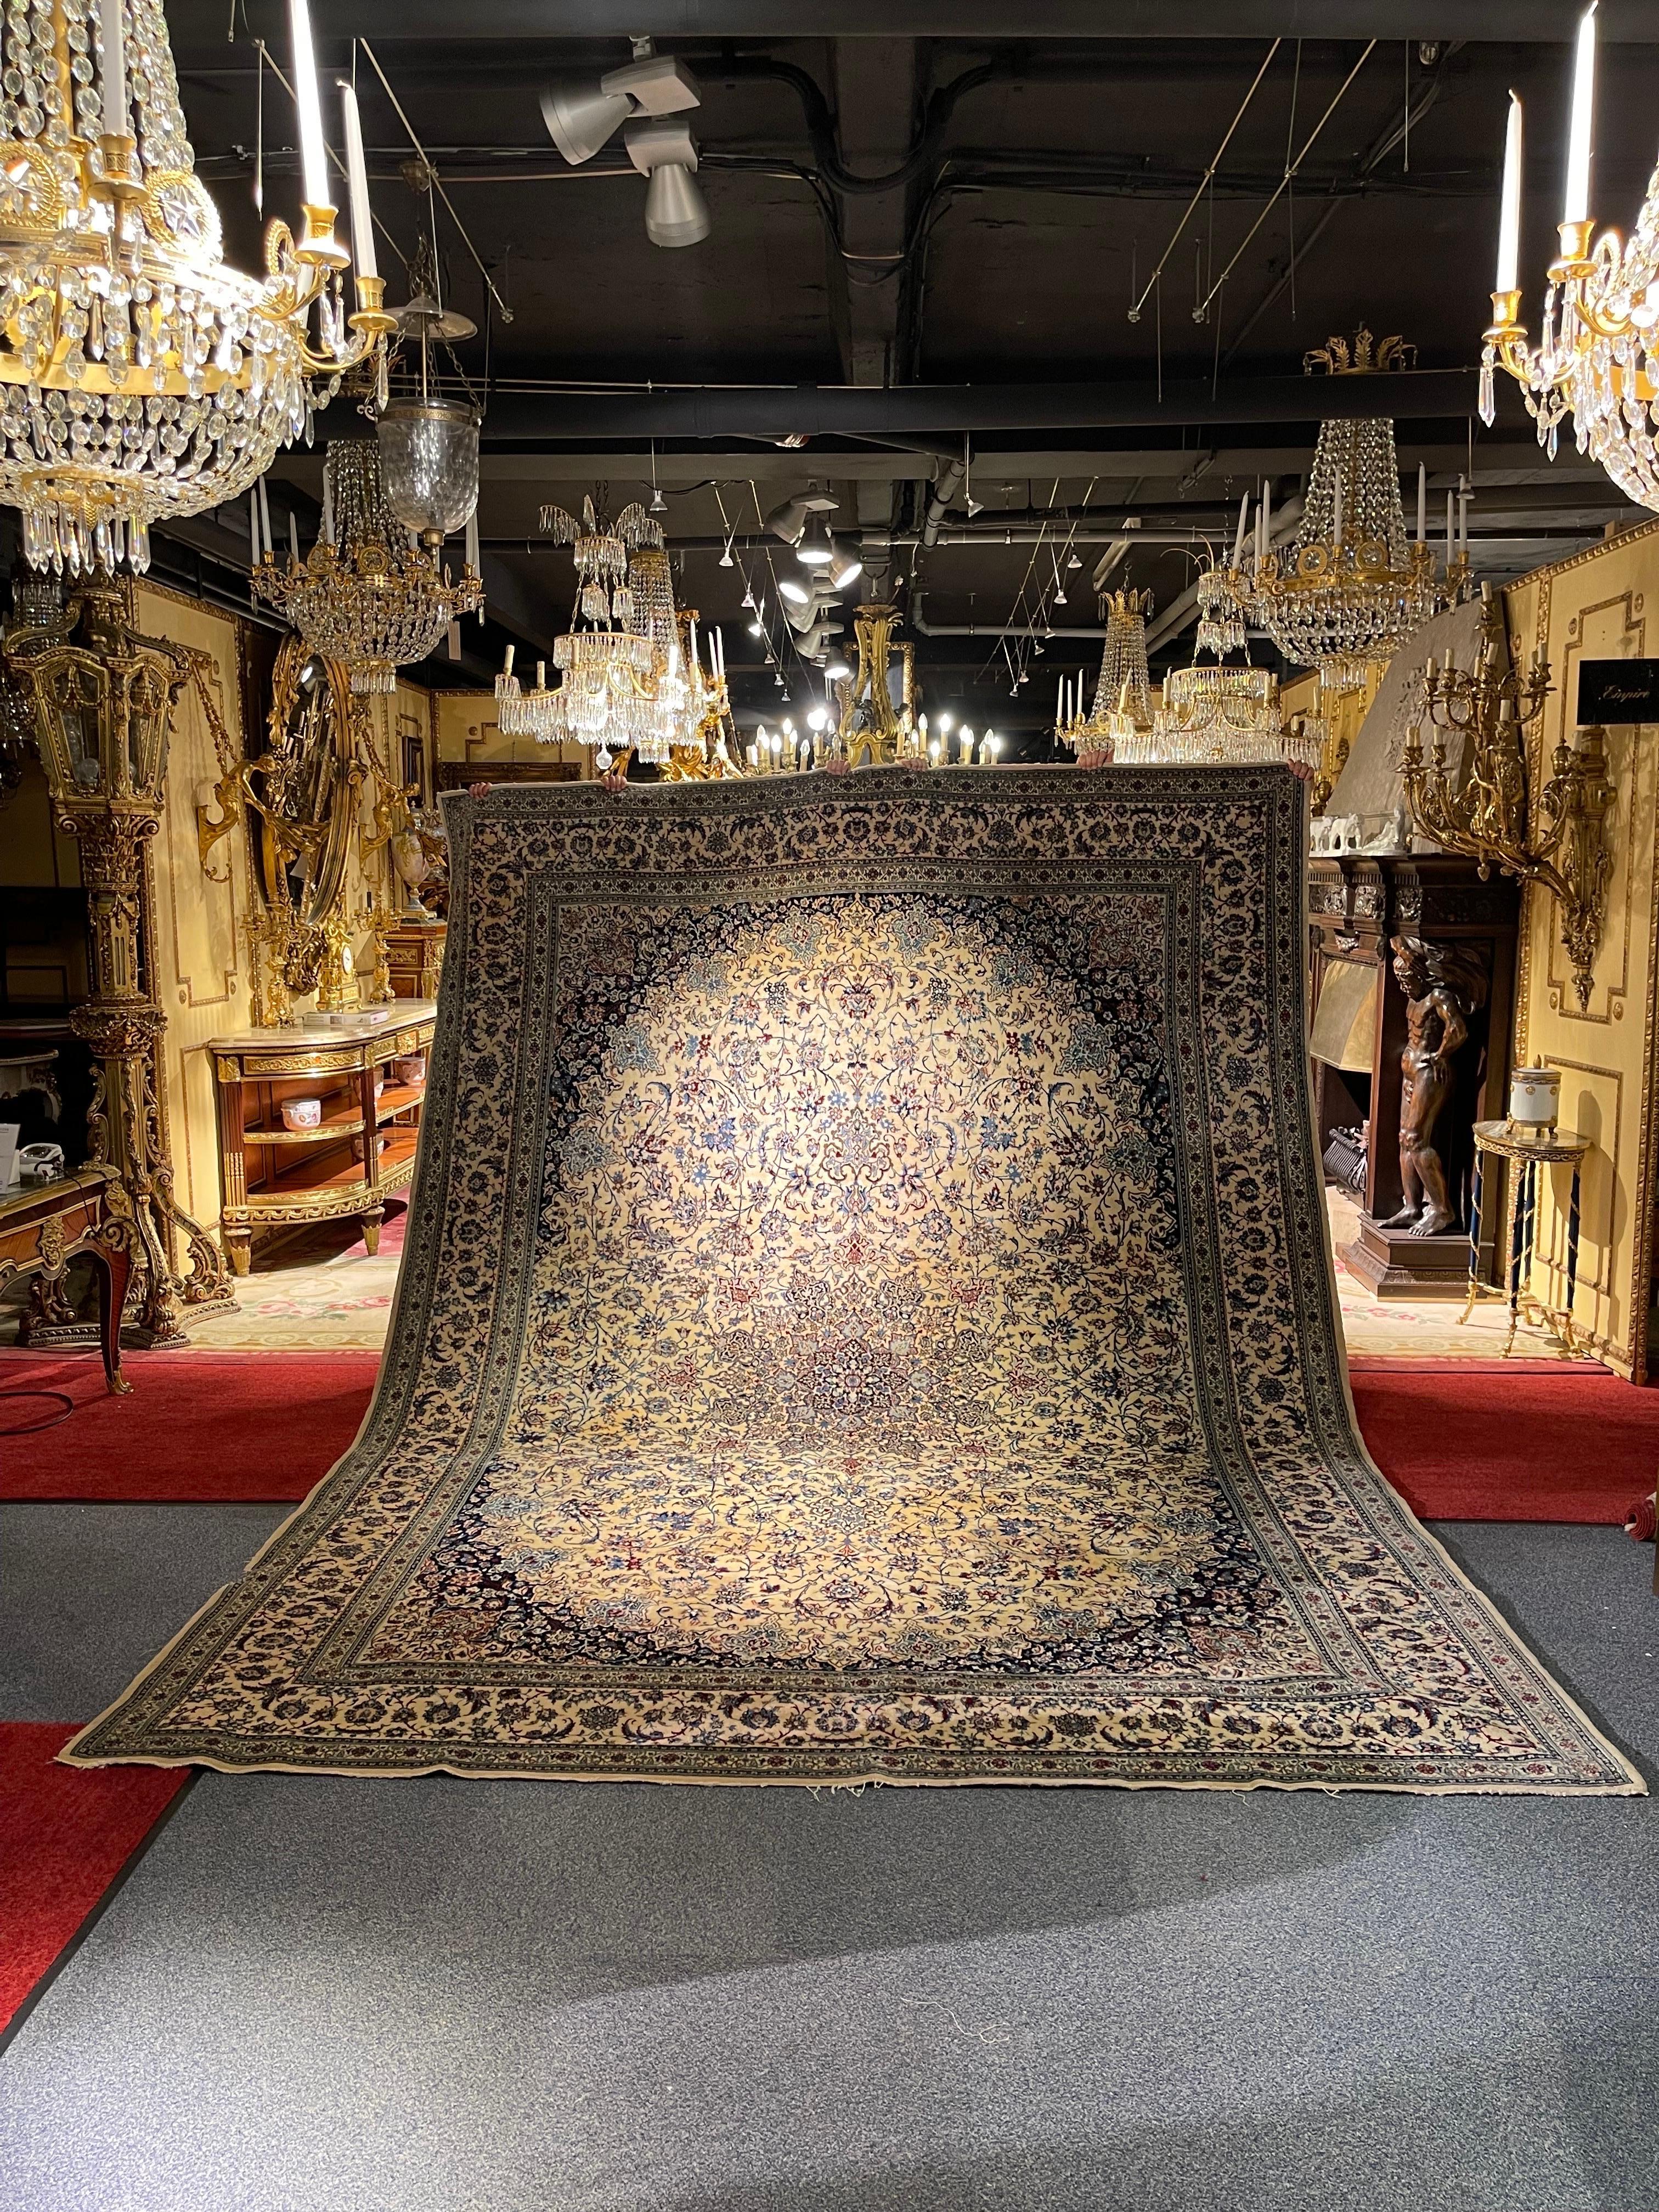 Oversized oriental rug Nain cork wool with silk, 20th century

Oversized carpet, hand-knotted. Medallion-shaped decor with rich and elaborate weaving,

A dreamlike carpet that looks more beautiful in nature than in the photos. Very impressive.